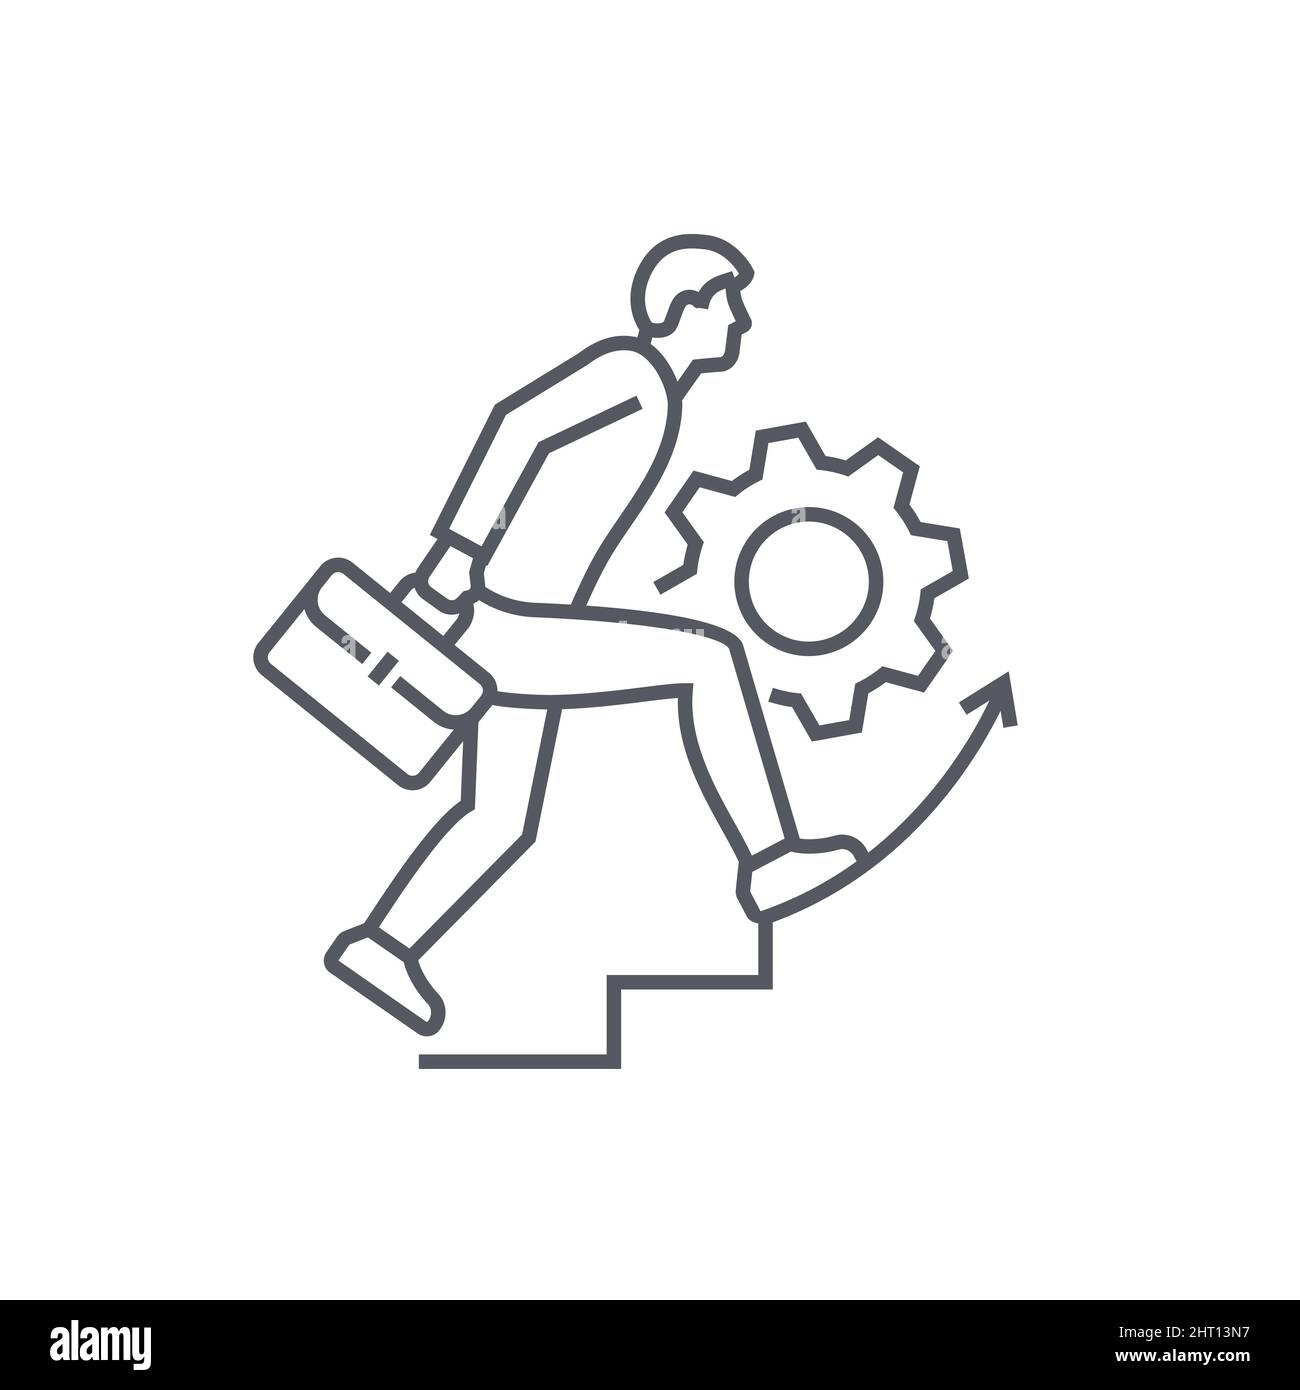 Career growth - modern black line design style icon on white background. Neat detailed image of man with briefcase climbing stairs. Achievement of pro Stock Vector